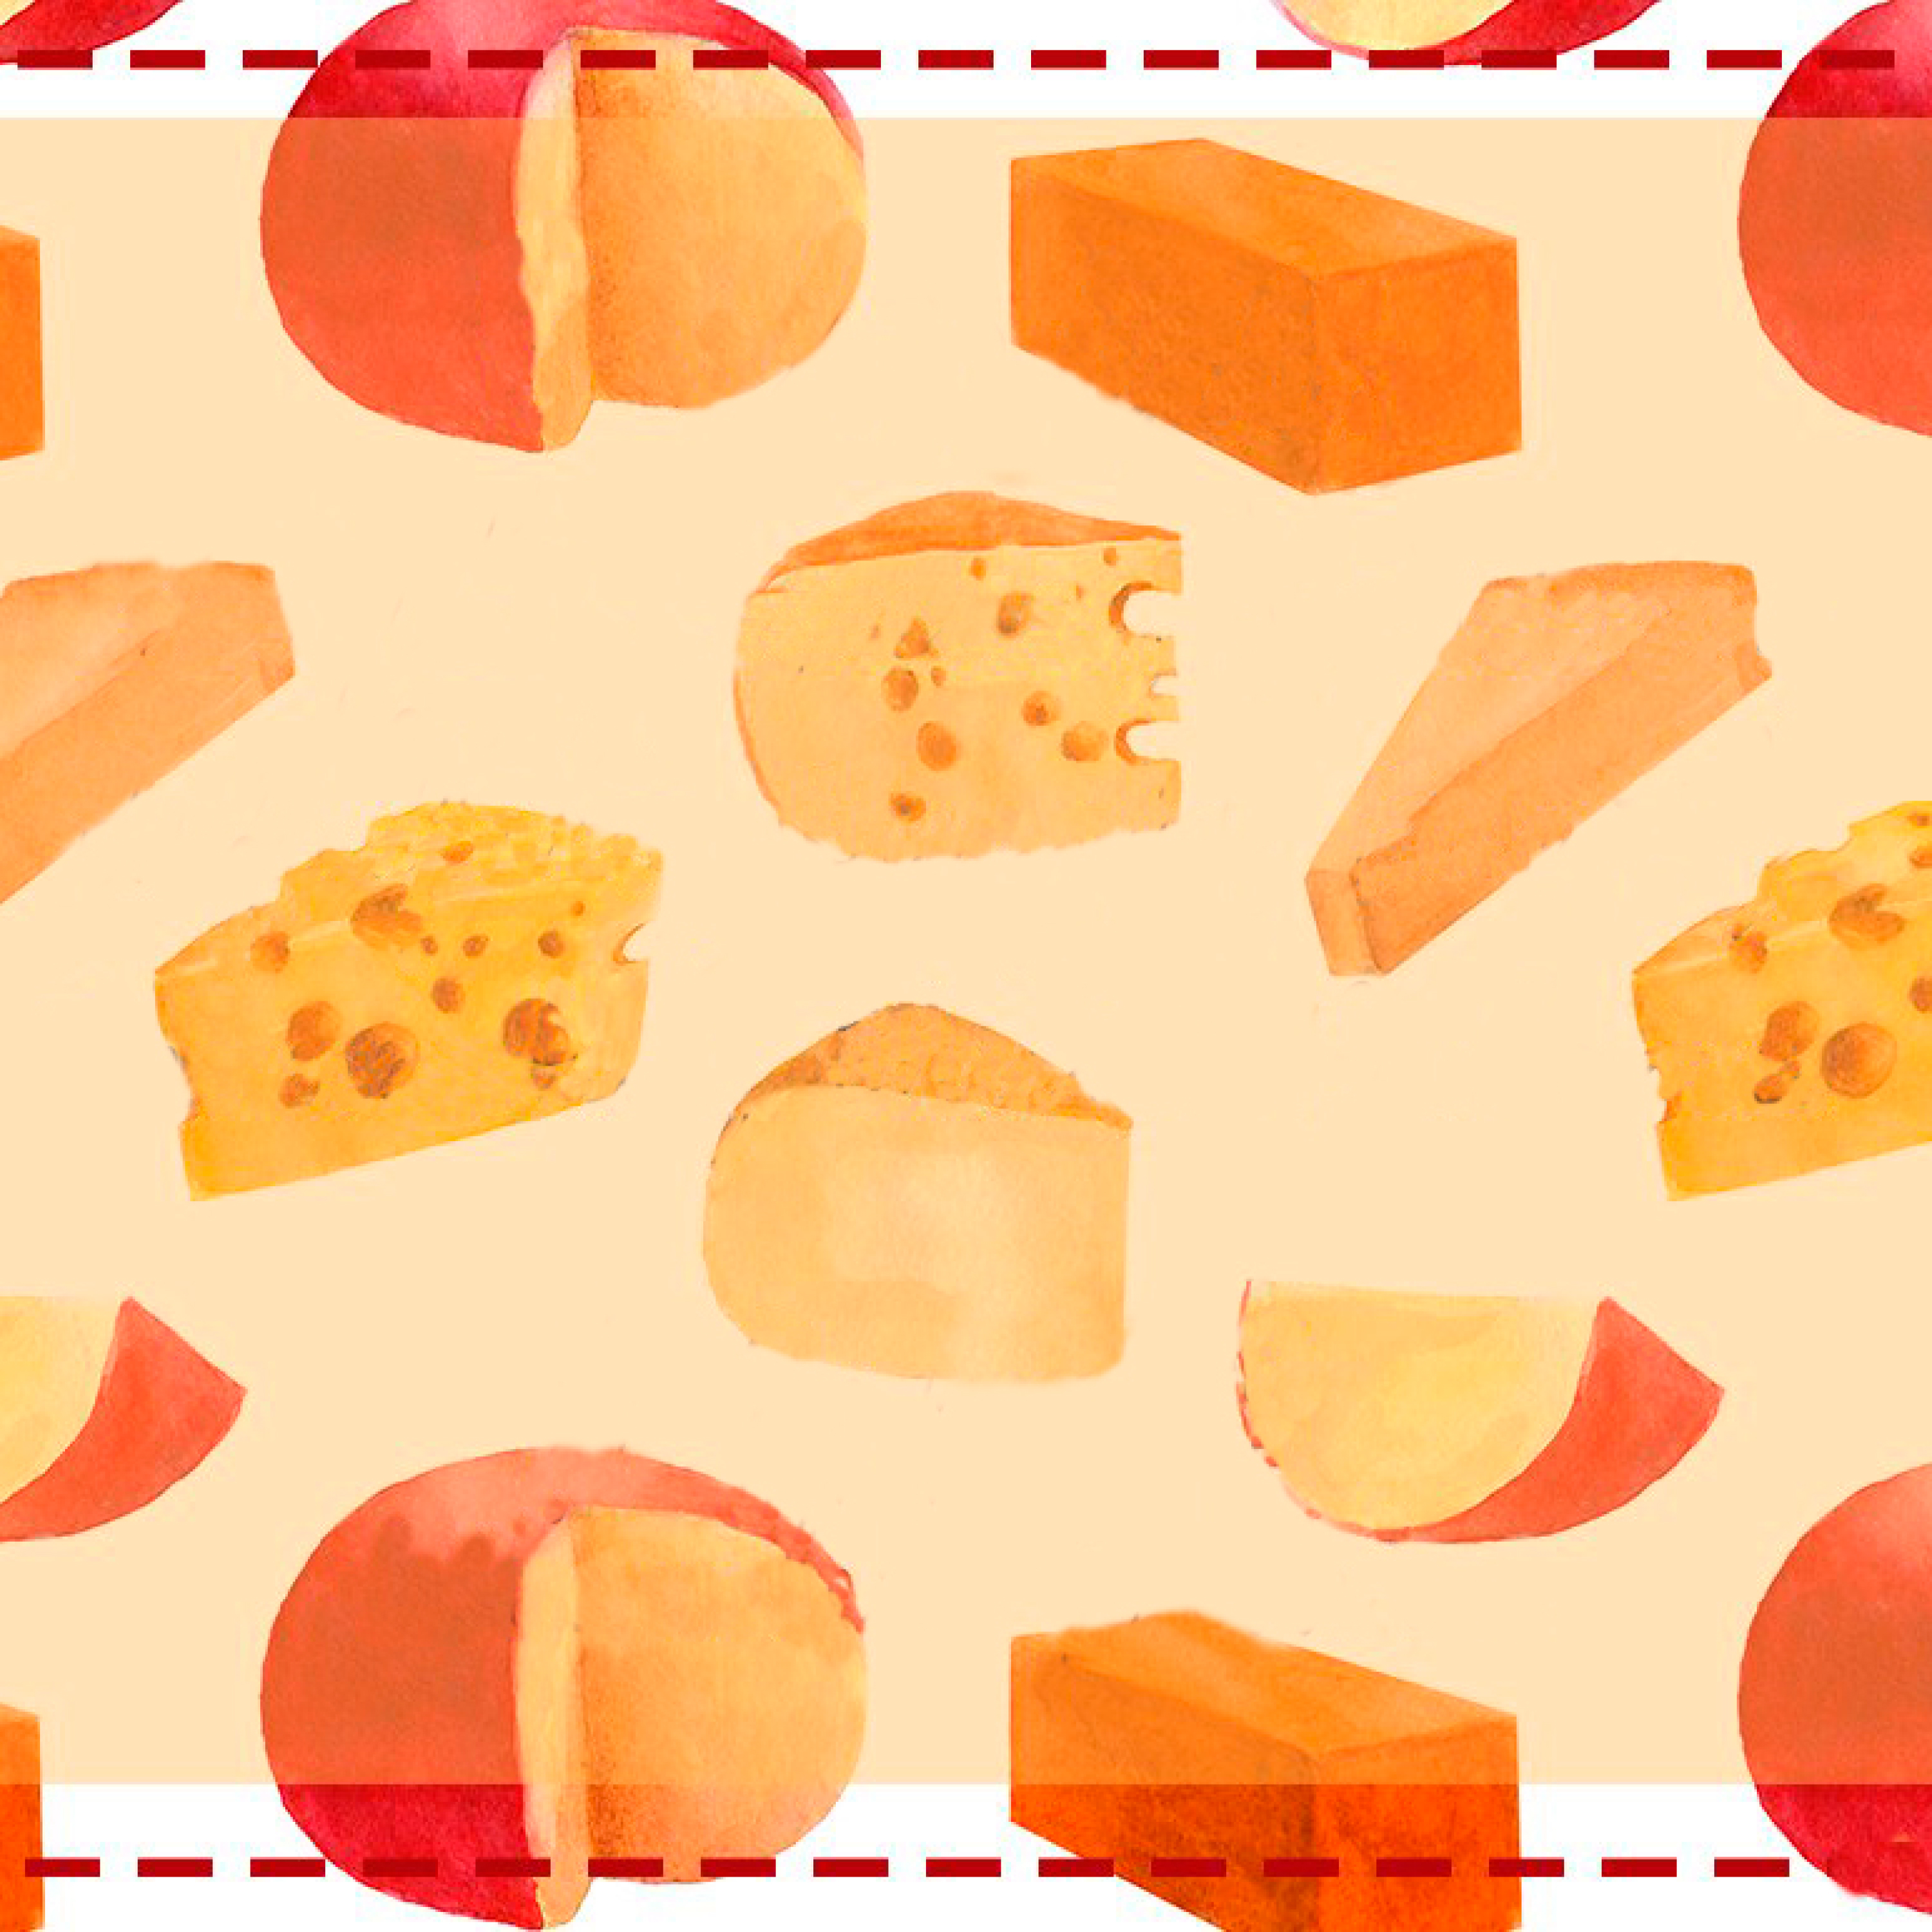 Set of colorful images of french cheeses.